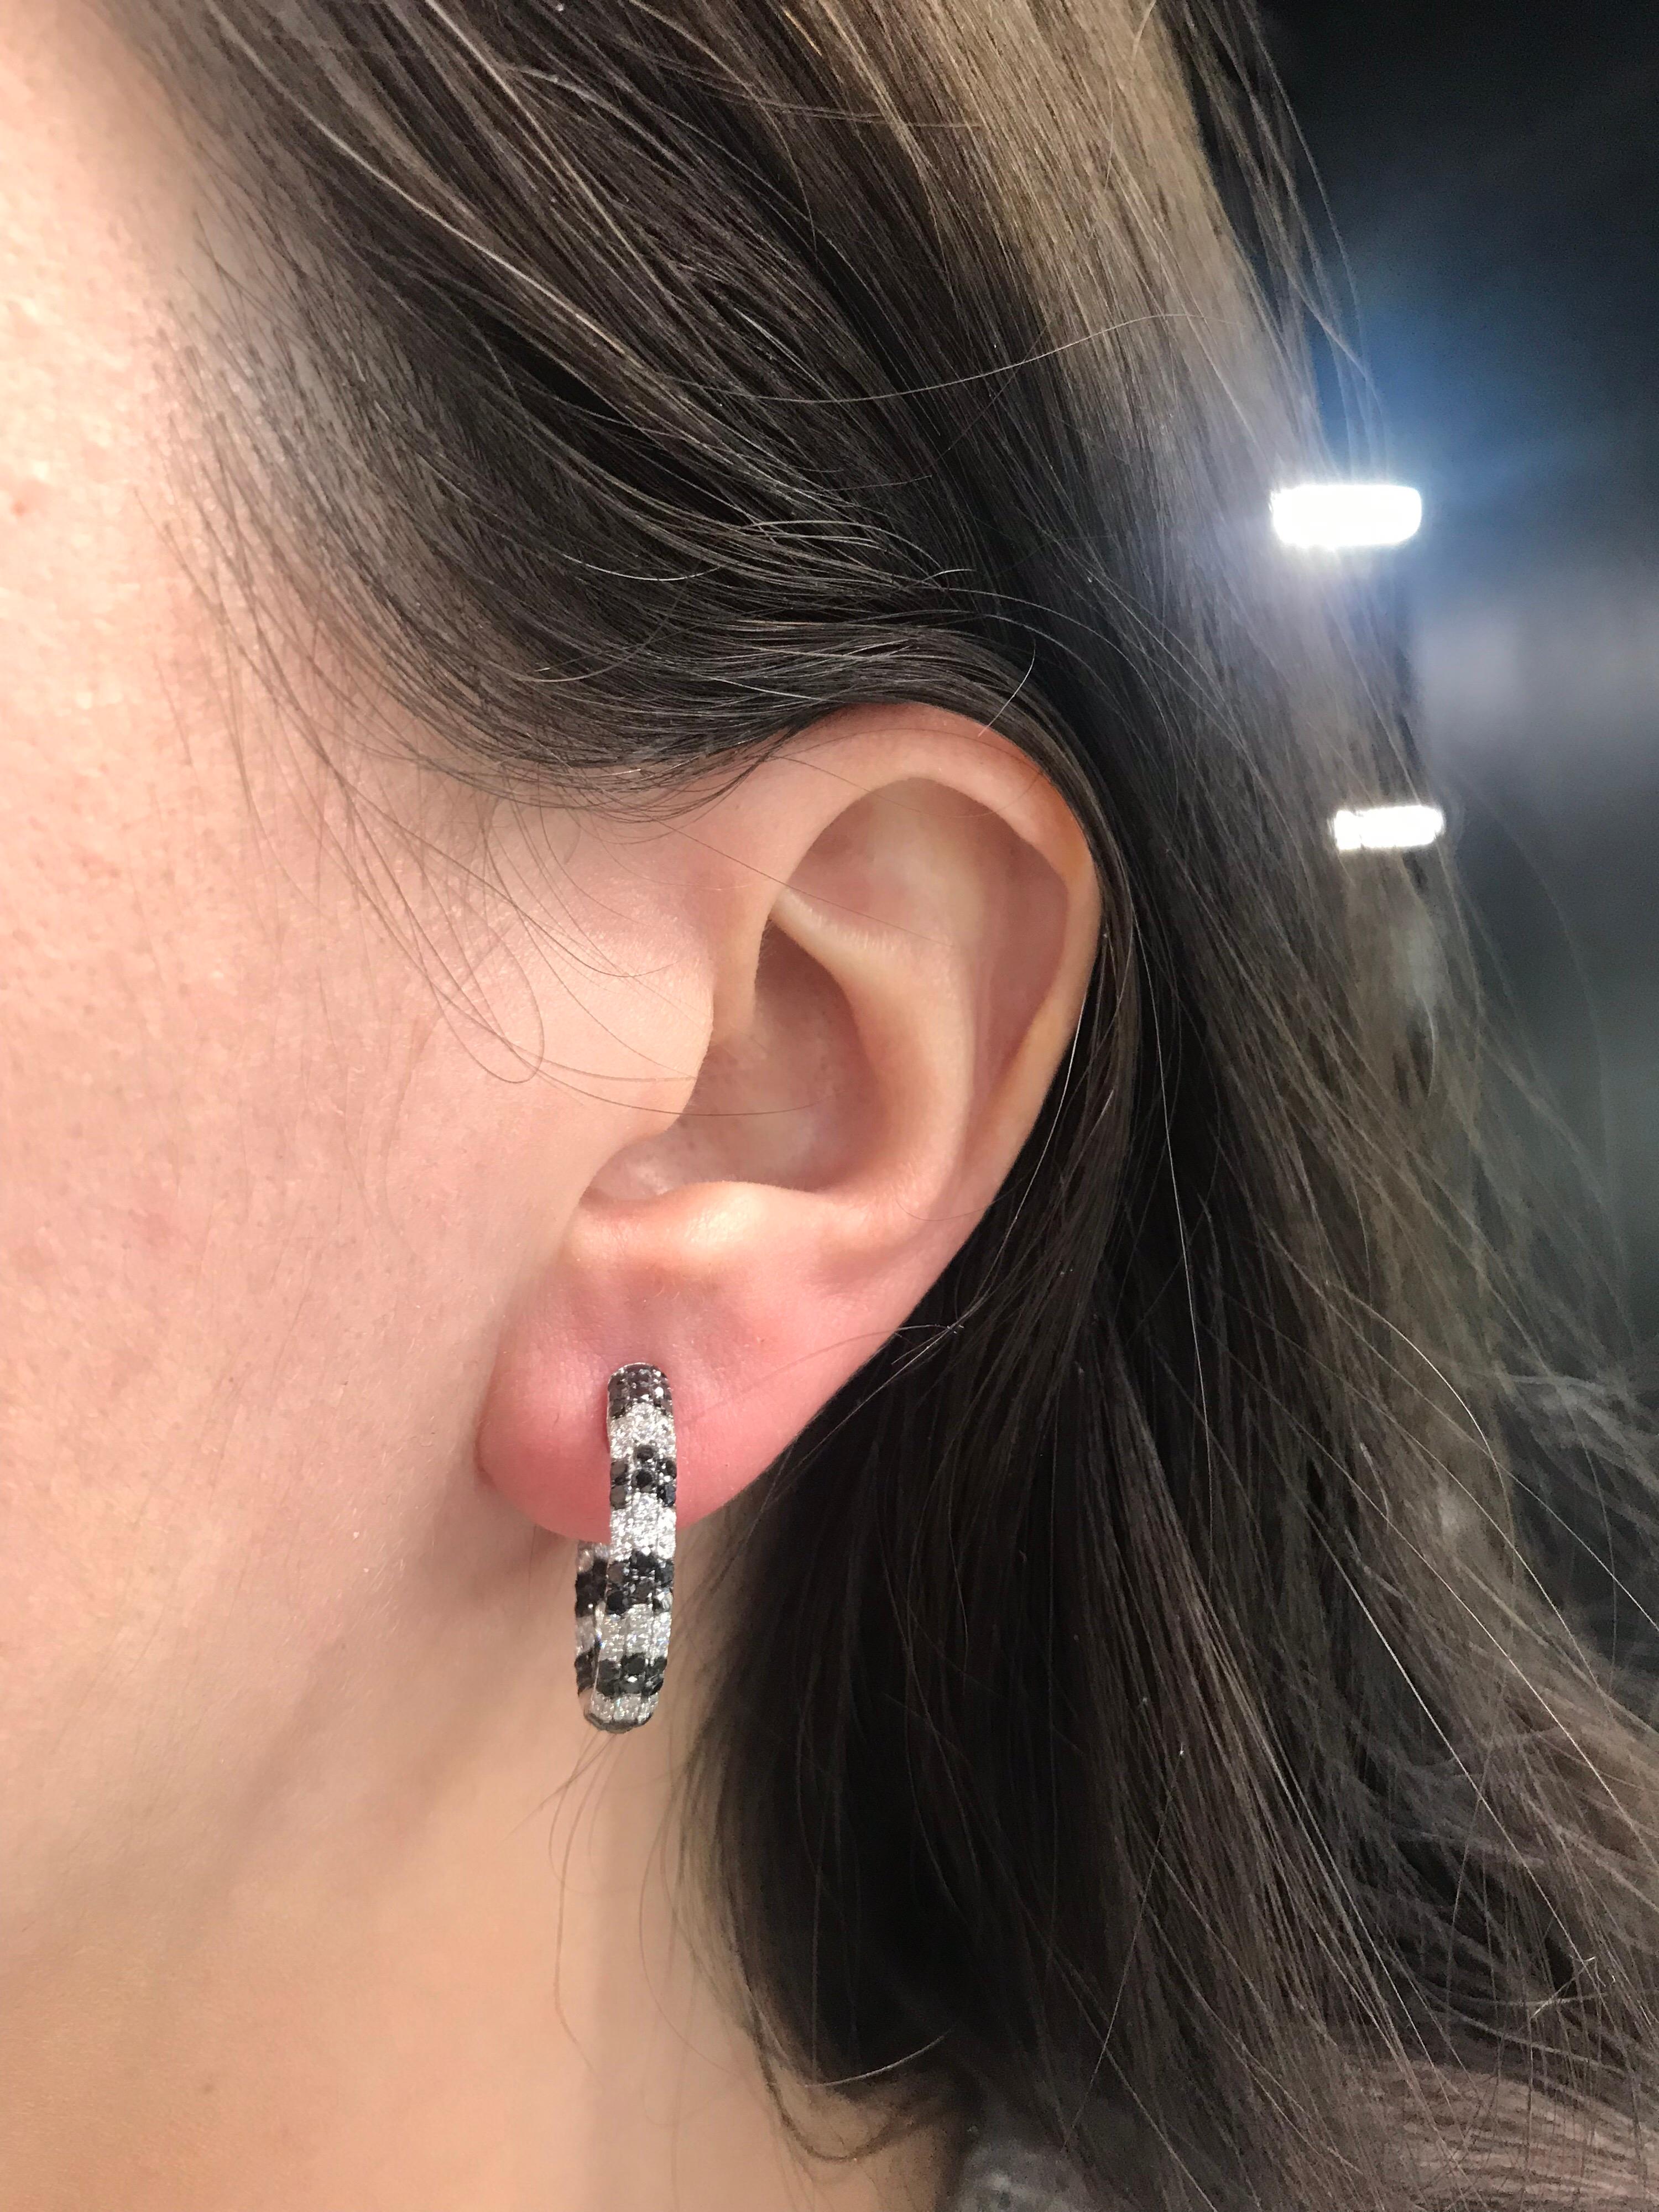 18K White Gold hoop earrings featuring 112 black diamonds weighing 2.70 carats and 84 round brilliants weighing 1.60 carats.
Color G-H
Clarity SI